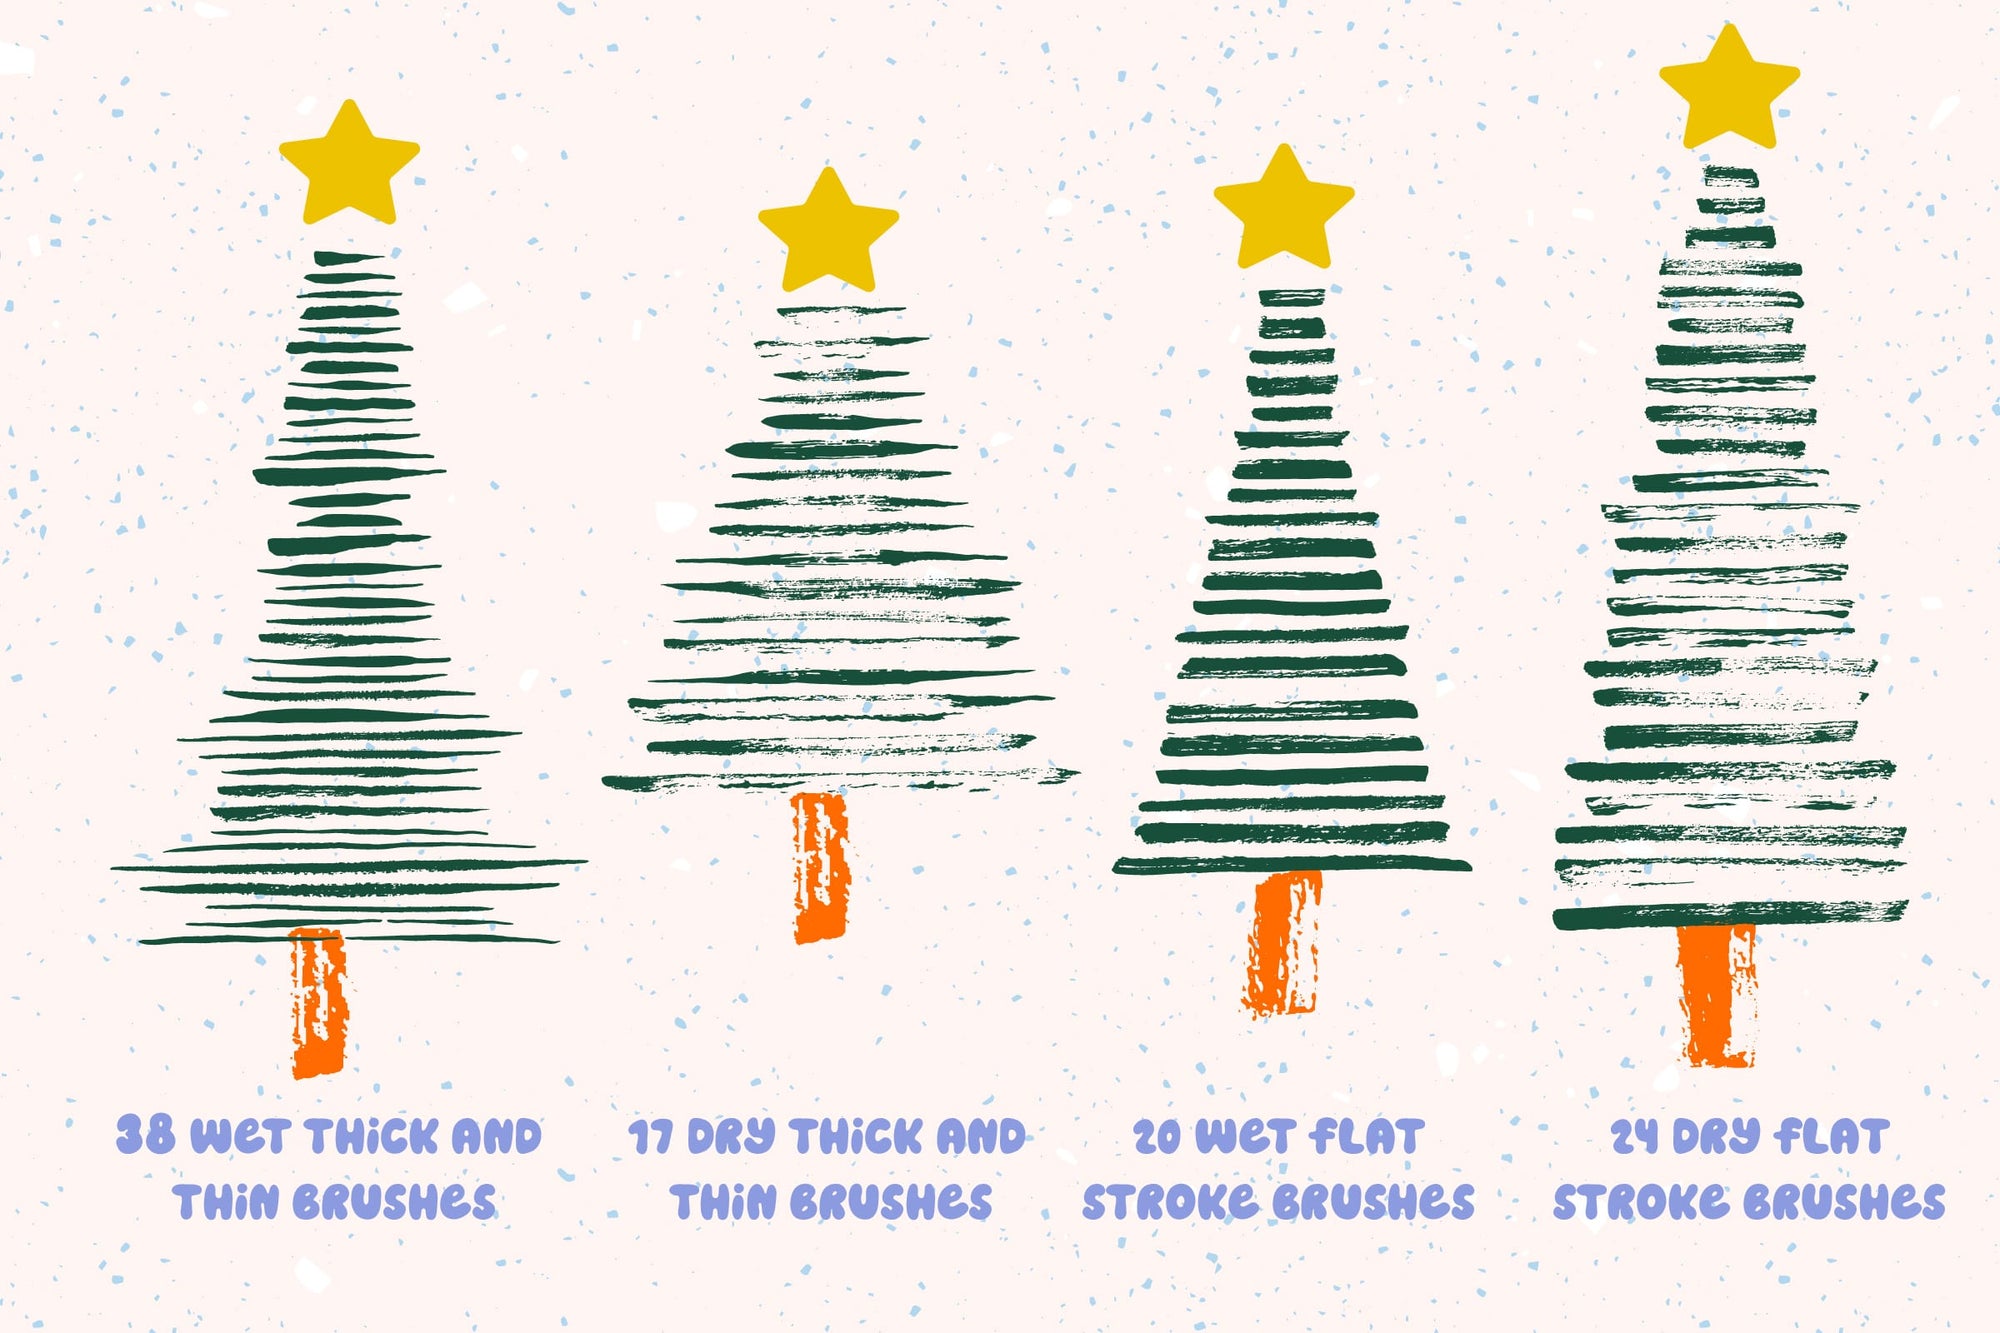 Four stylized Christmas trees with different Esther Nariyoshi Studio Adobe Illustrator Bristles and Strokes brushes 99-pack designs, each topped with a yellow star, on a speckled background.